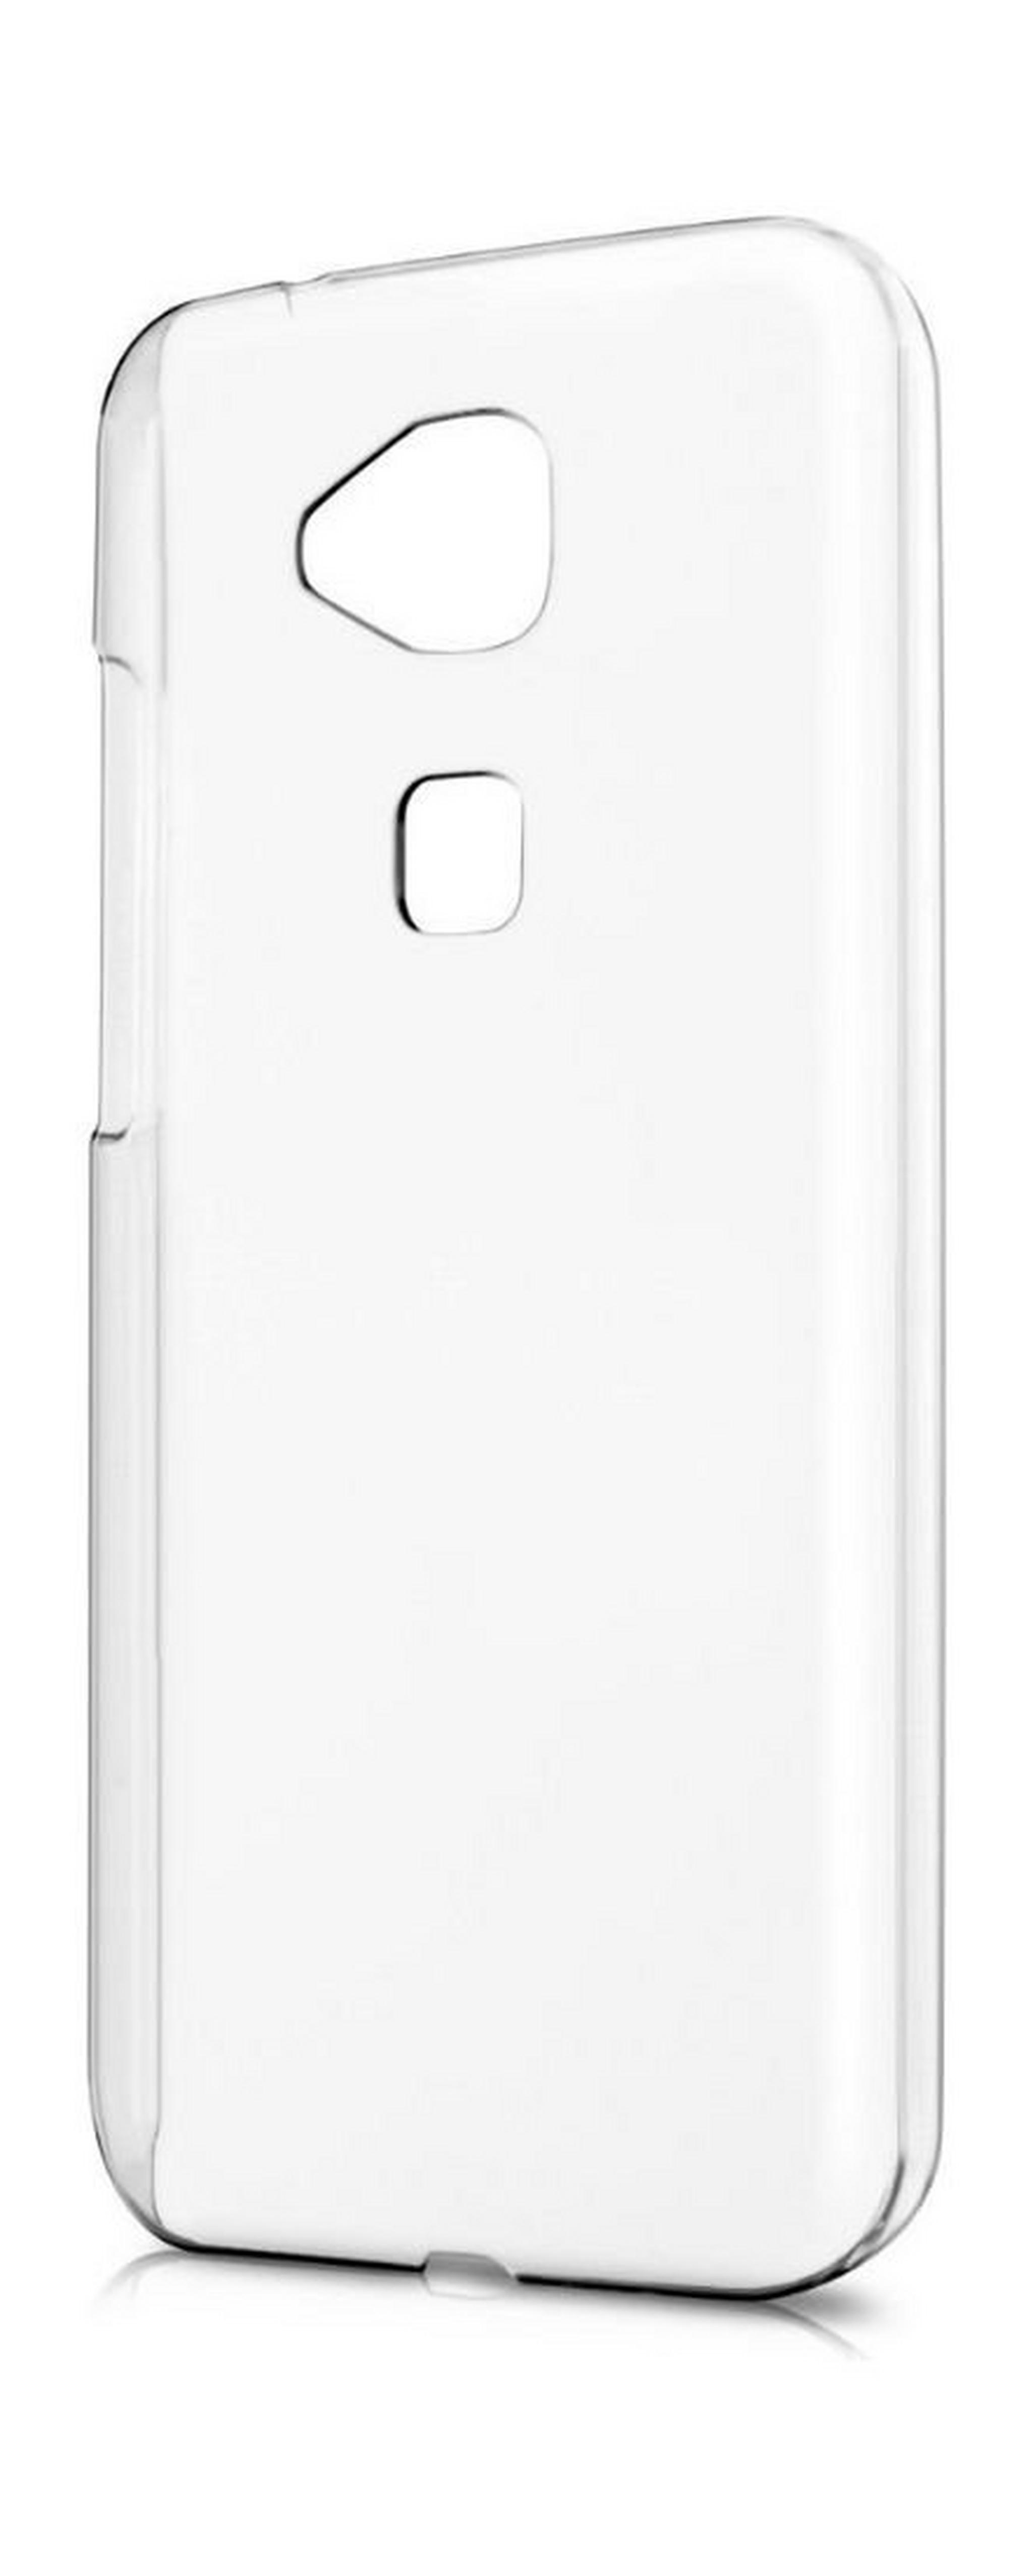 Huawei Protective Case For Huawei G8 - Clear